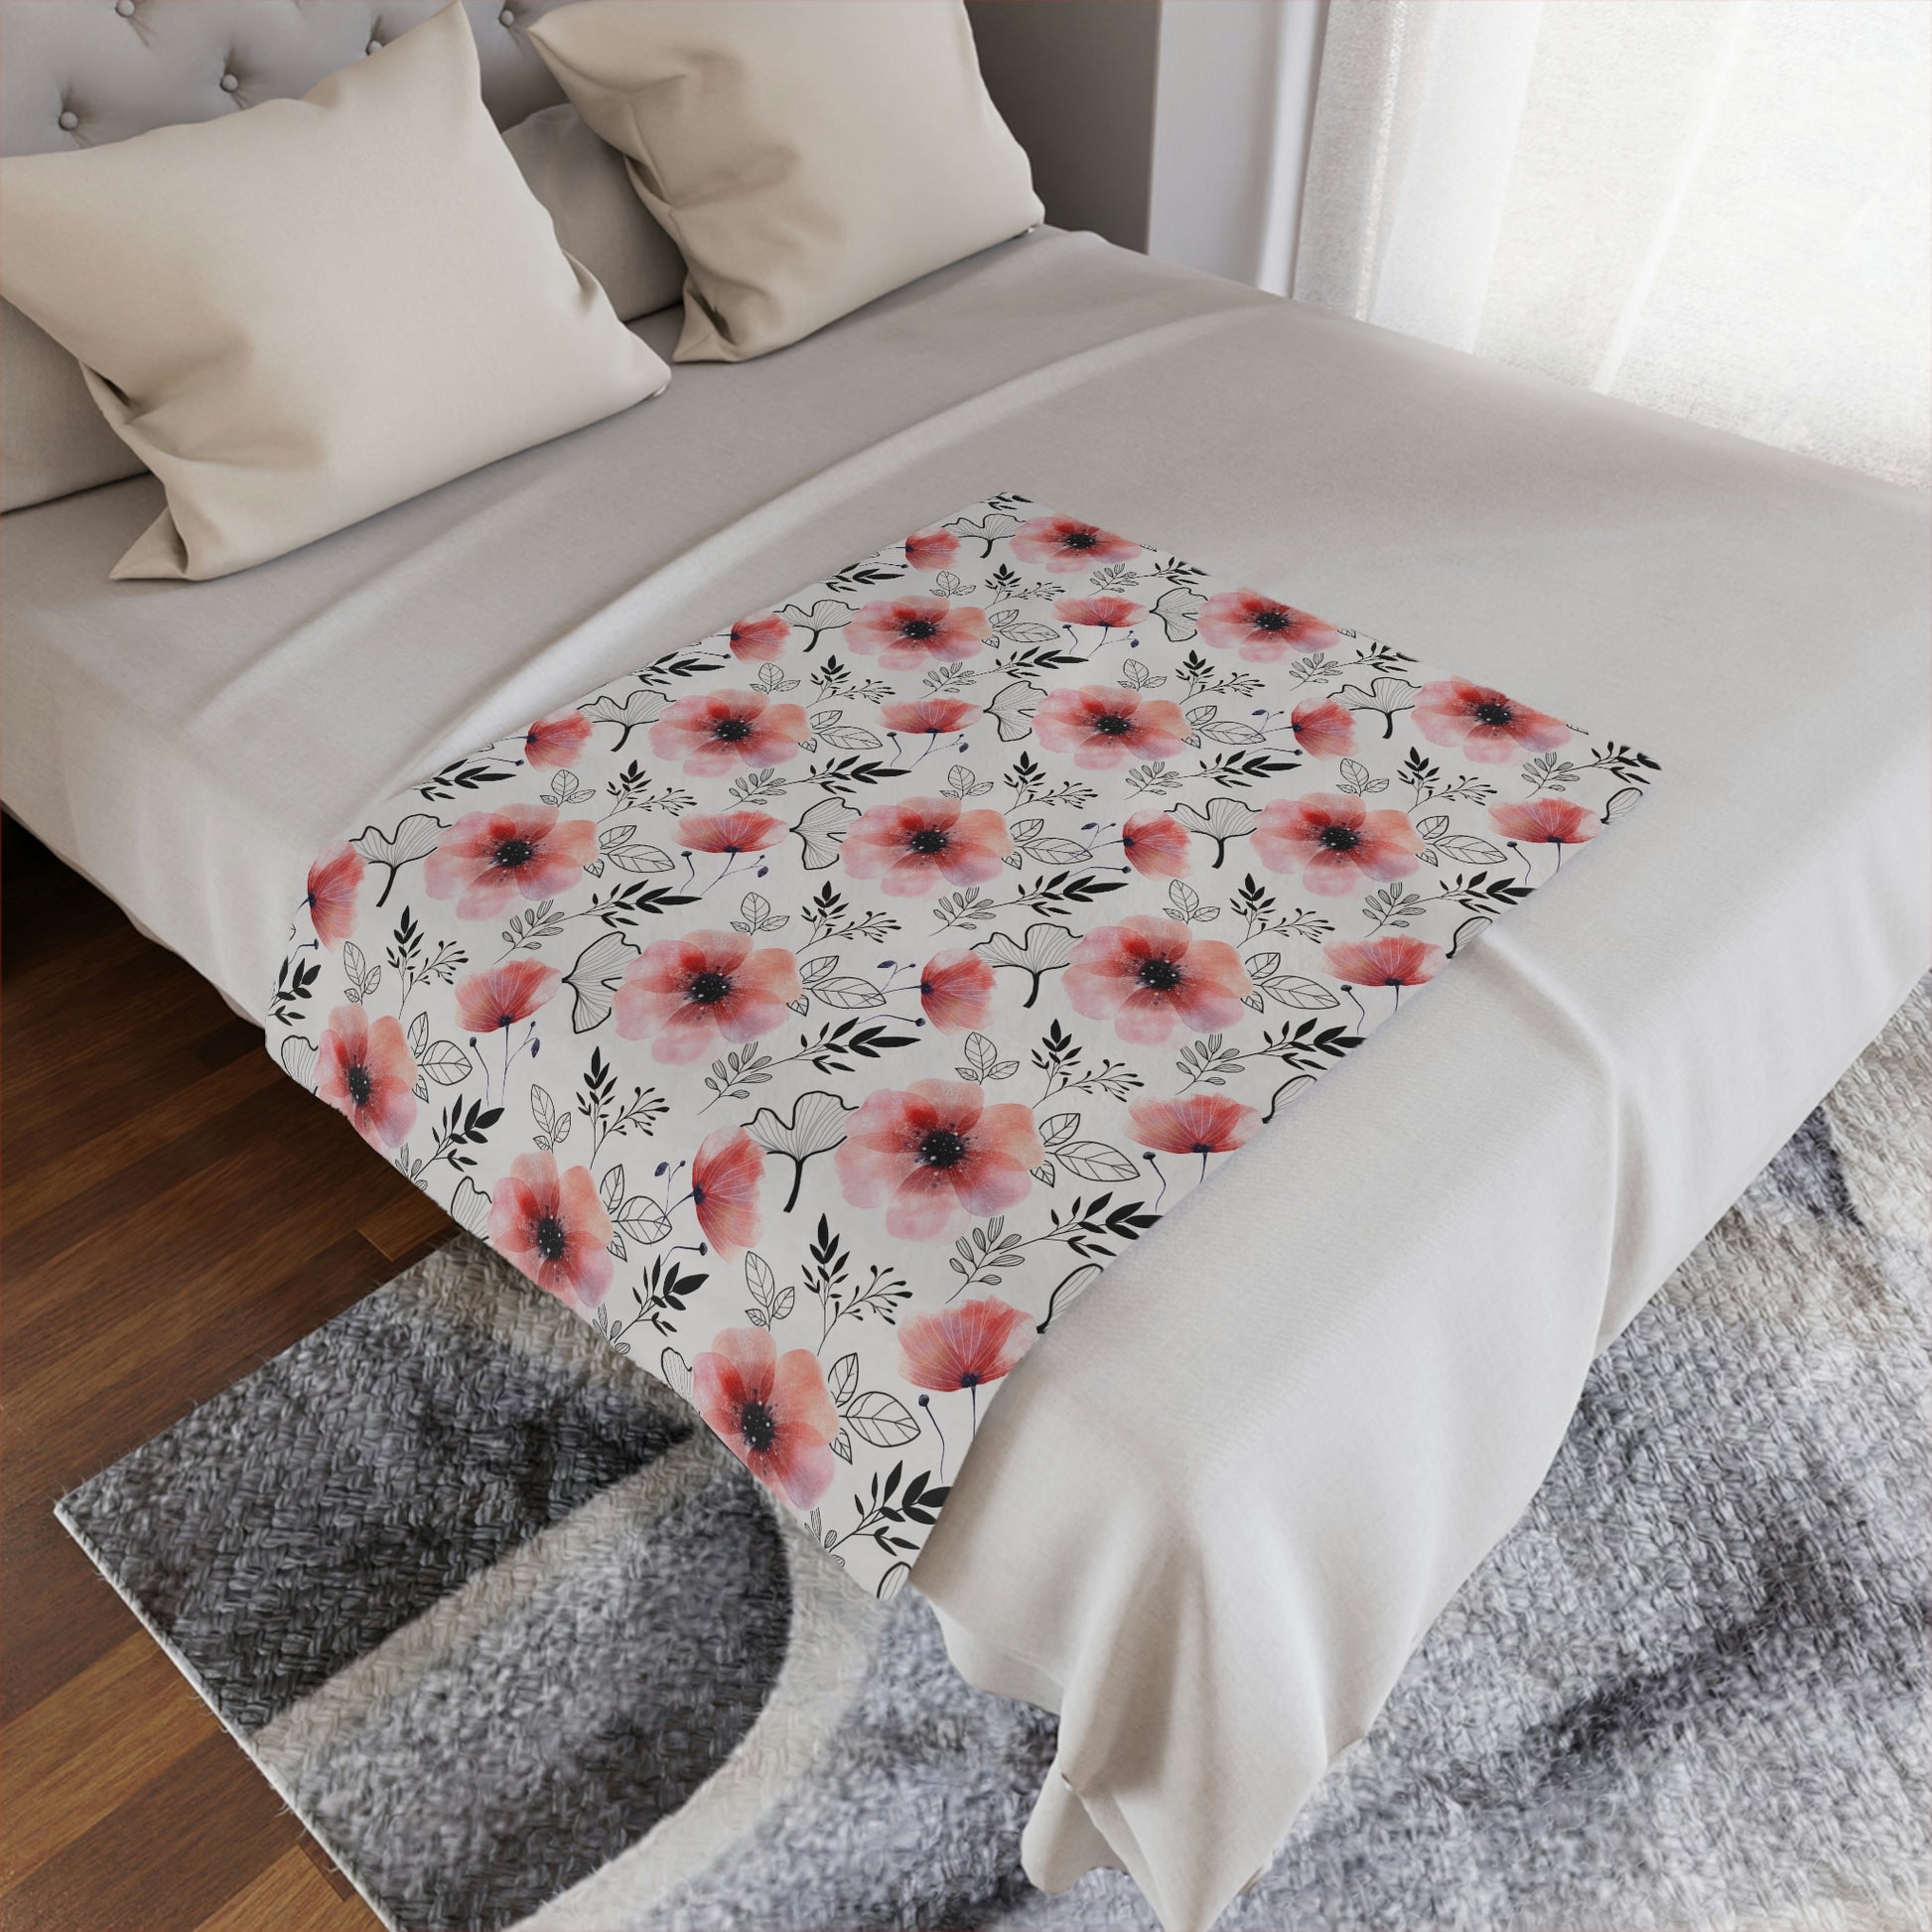 pink flowers with black outlines pattern, pink floral throw blanket lying on a bed, pink flowers on a plush blanket lying next to pillows as part of your bedroom decor